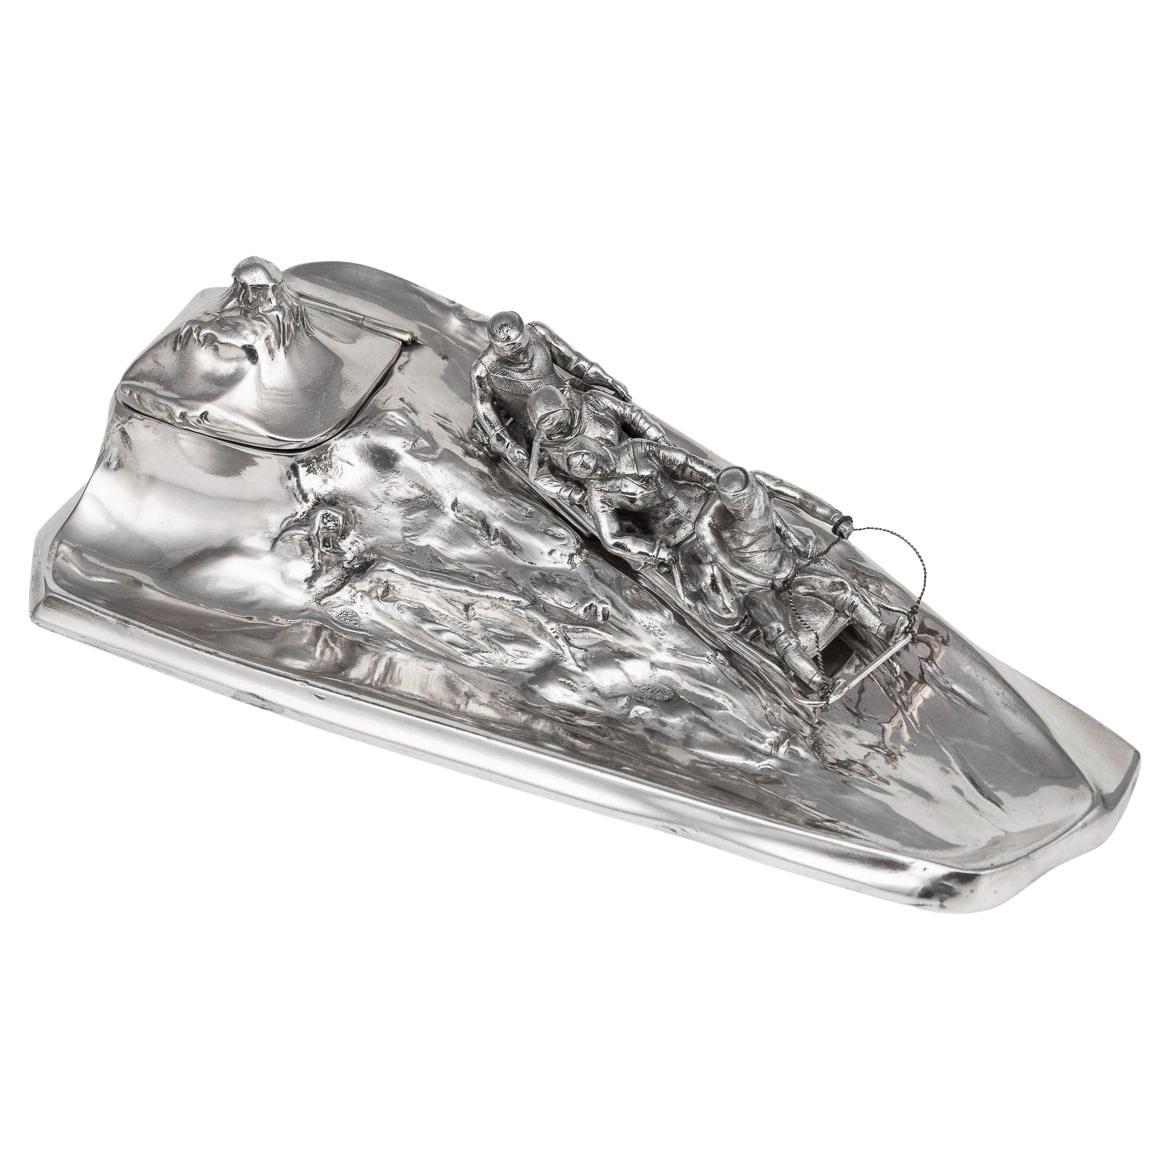 Antique 20th Century German Silver Plated Toboggan Shaped Inkwell, Kayser c.1920 For Sale